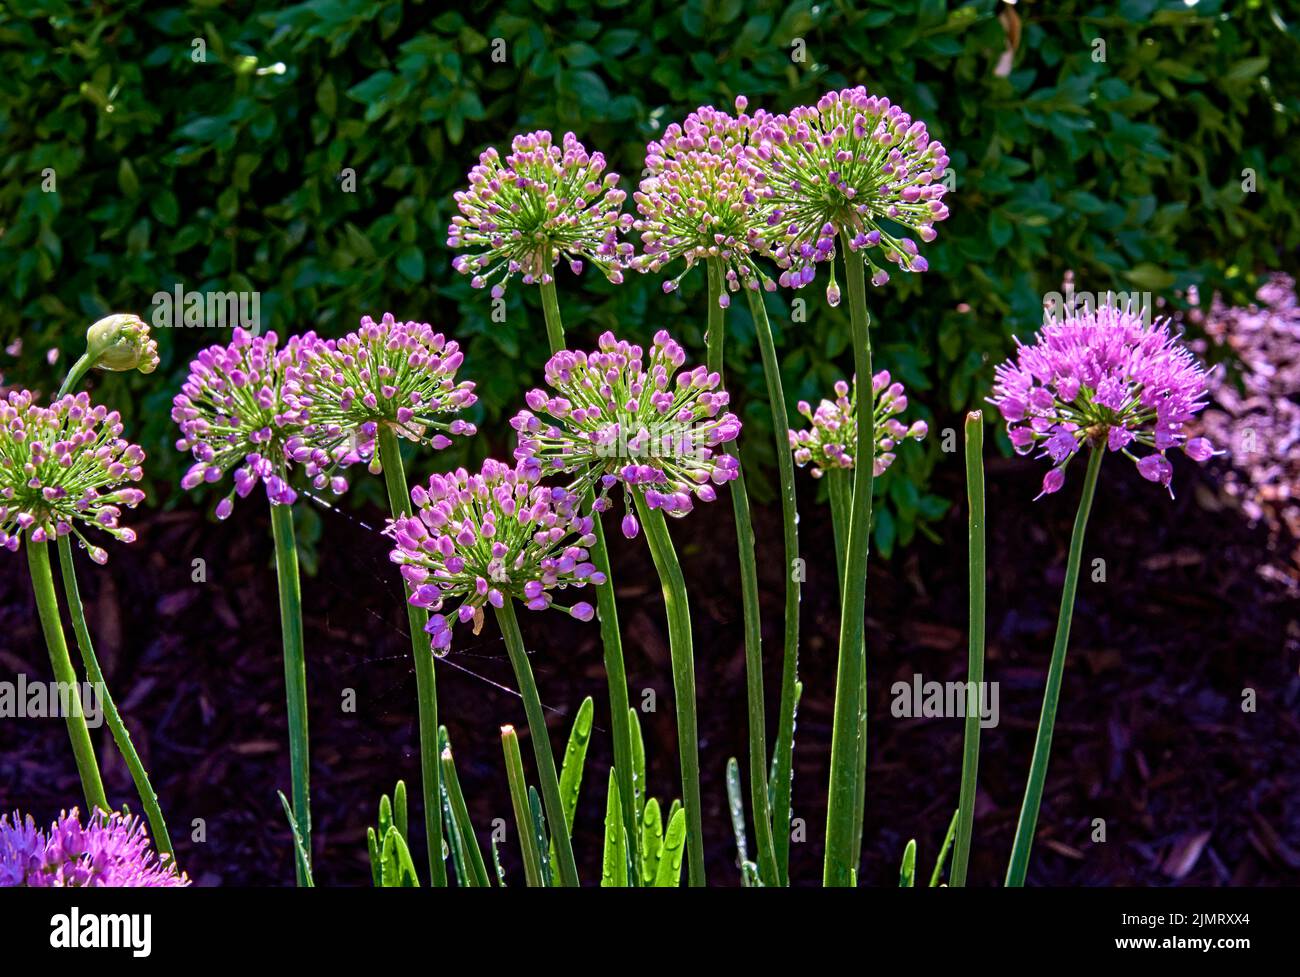 Millenium - Ornamental Onion -Allium hybrid Bright rosy purple, rounded flower clusters appear on strong stems. Stock Photo